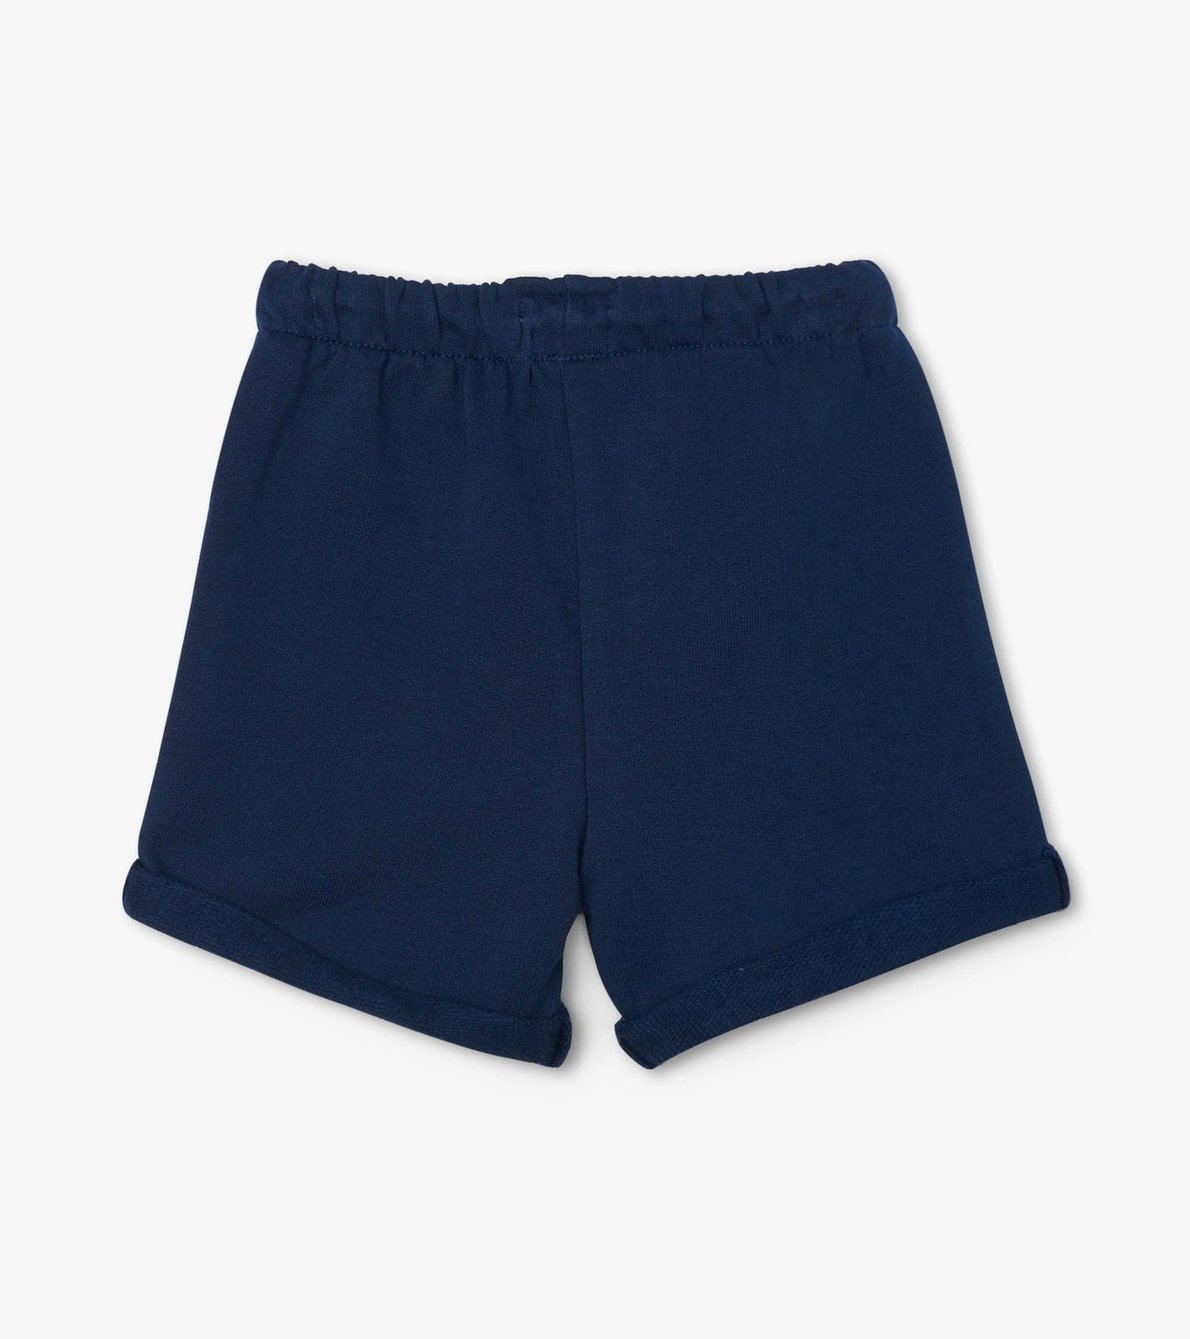 View larger image of Navy French Terry Baby Shorts